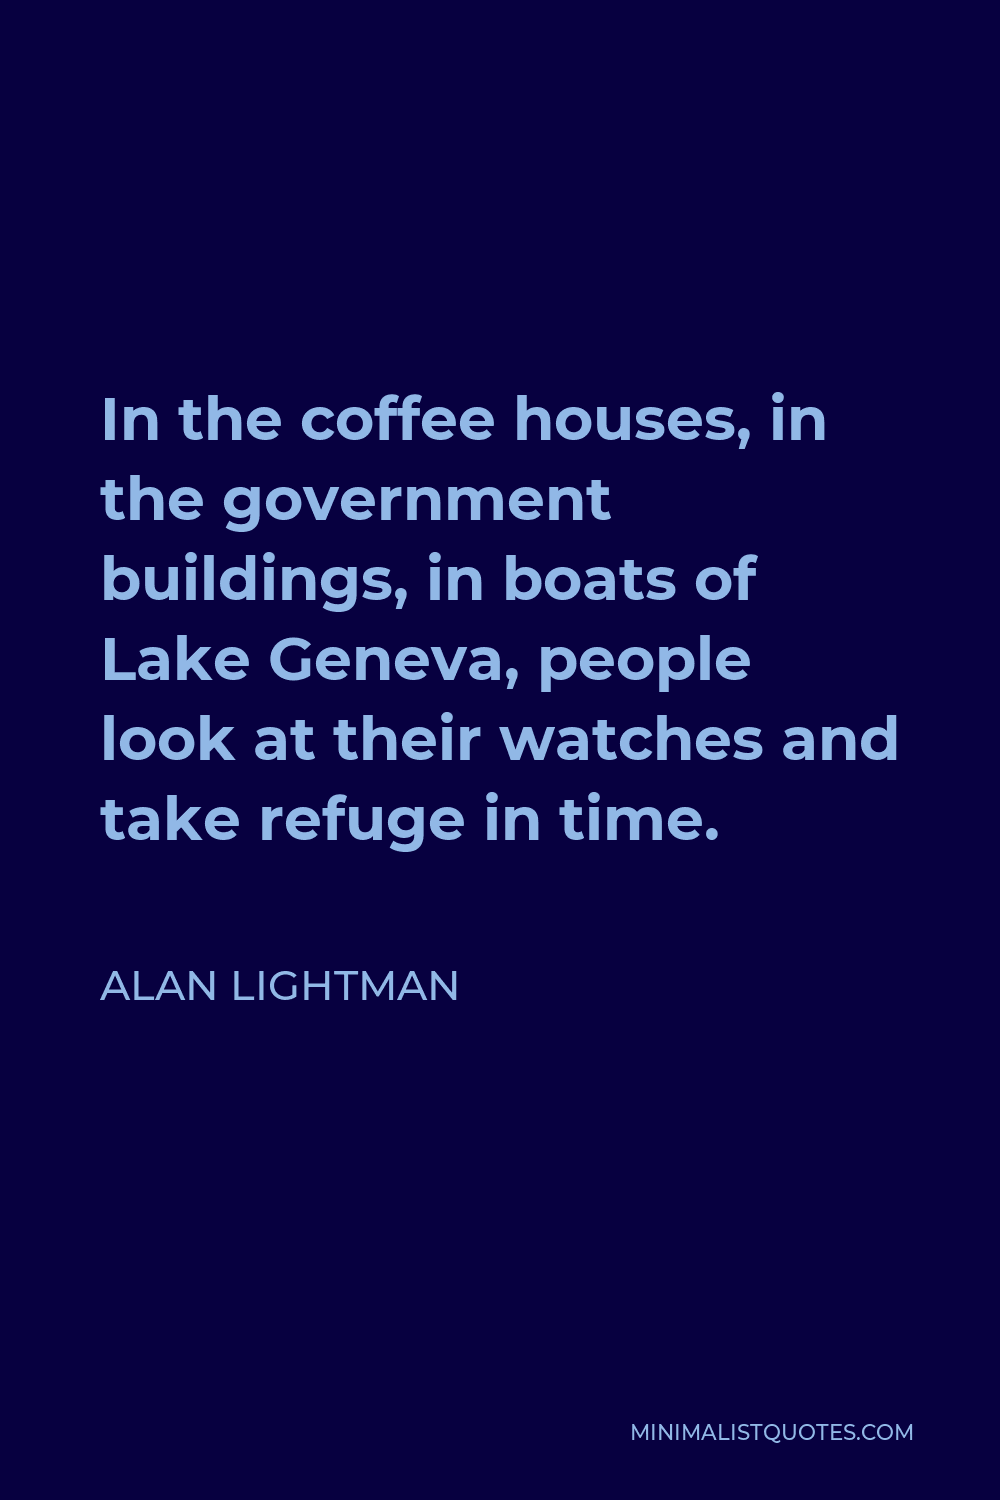 Alan Lightman Quote - In the coffee houses, in the government buildings, in boats of Lake Geneva, people look at their watches and take refuge in time.